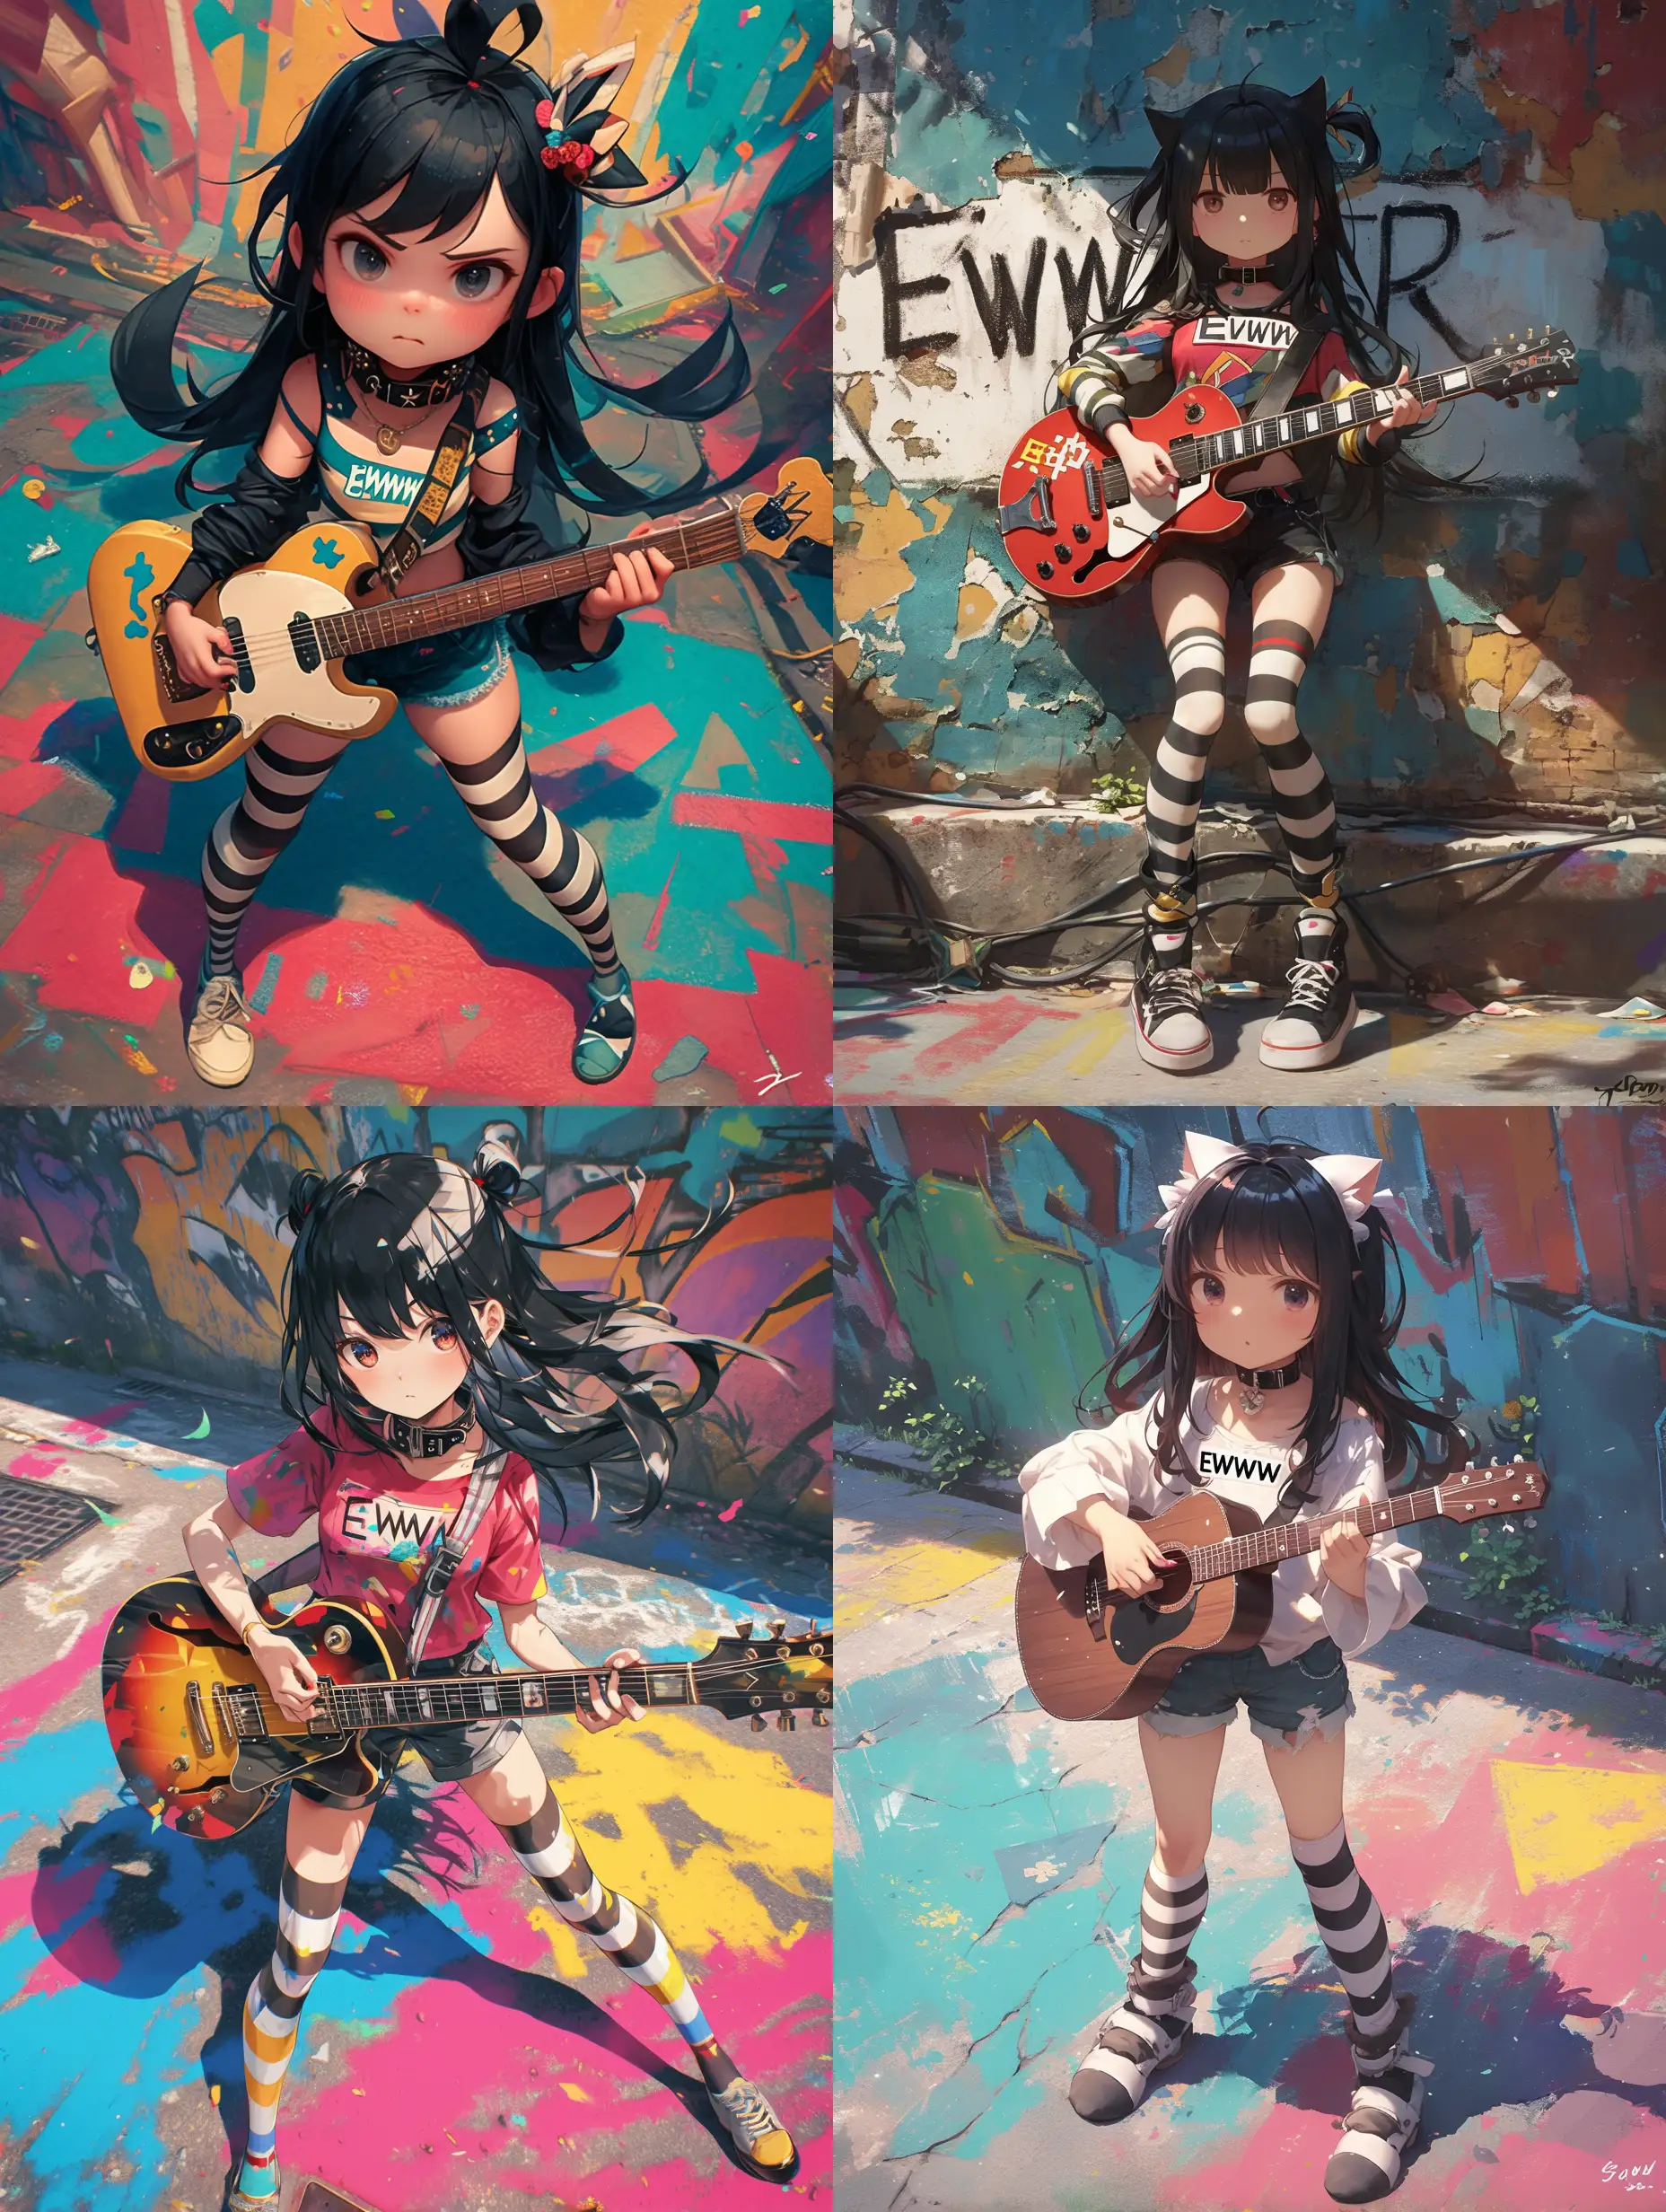 Cute-Anime-Girl-Playing-Guitar-on-Chalk-Painted-Street